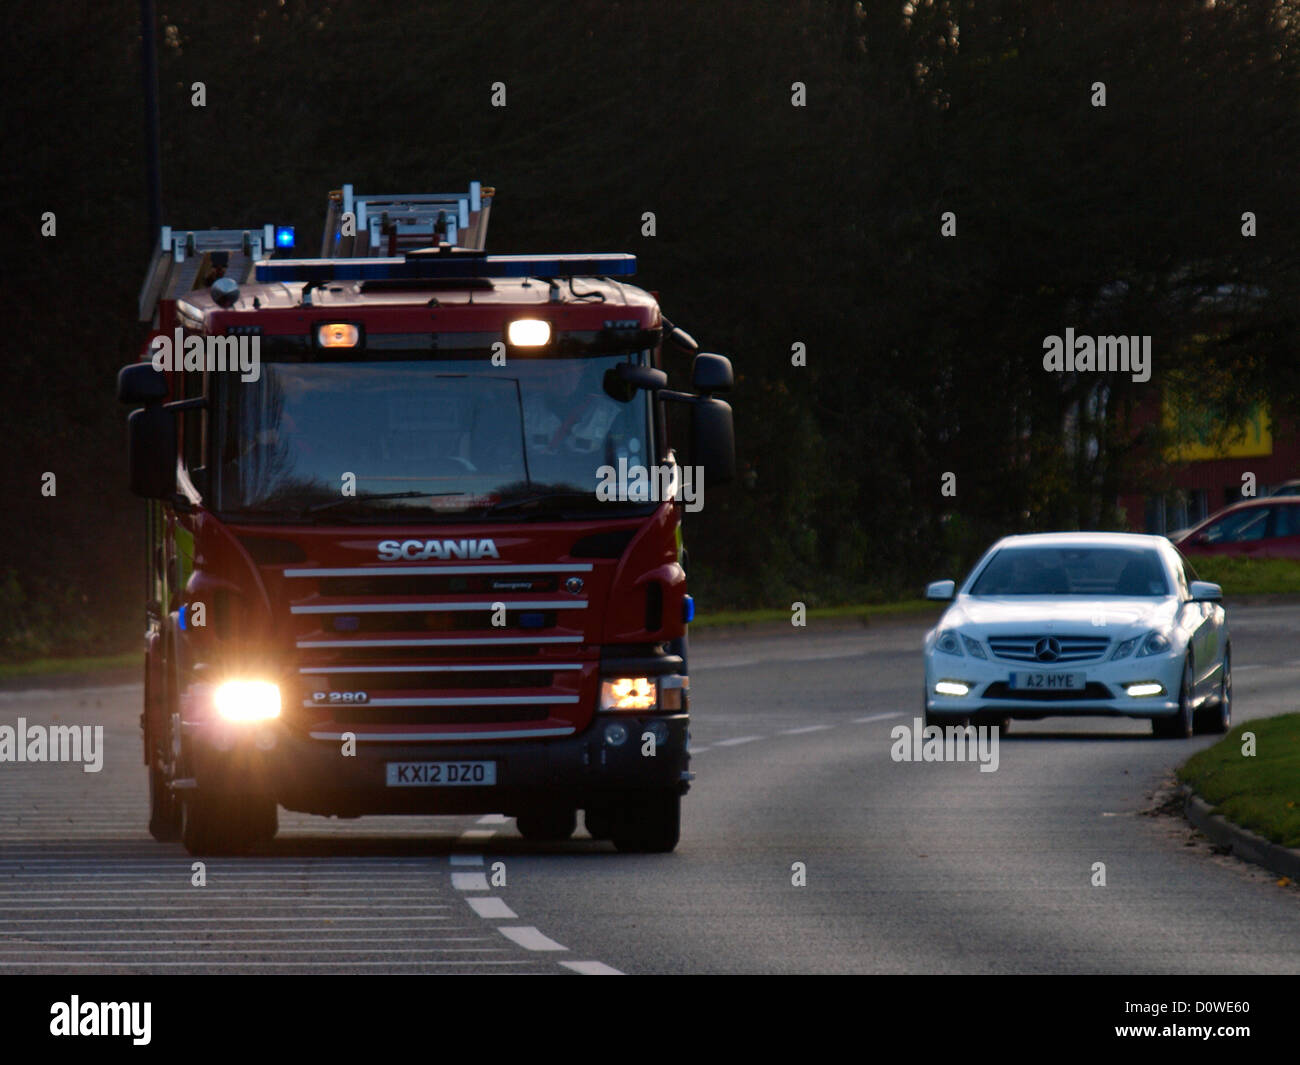 Fire engine on an emergency call out, Cambridge, UK Stock Photo